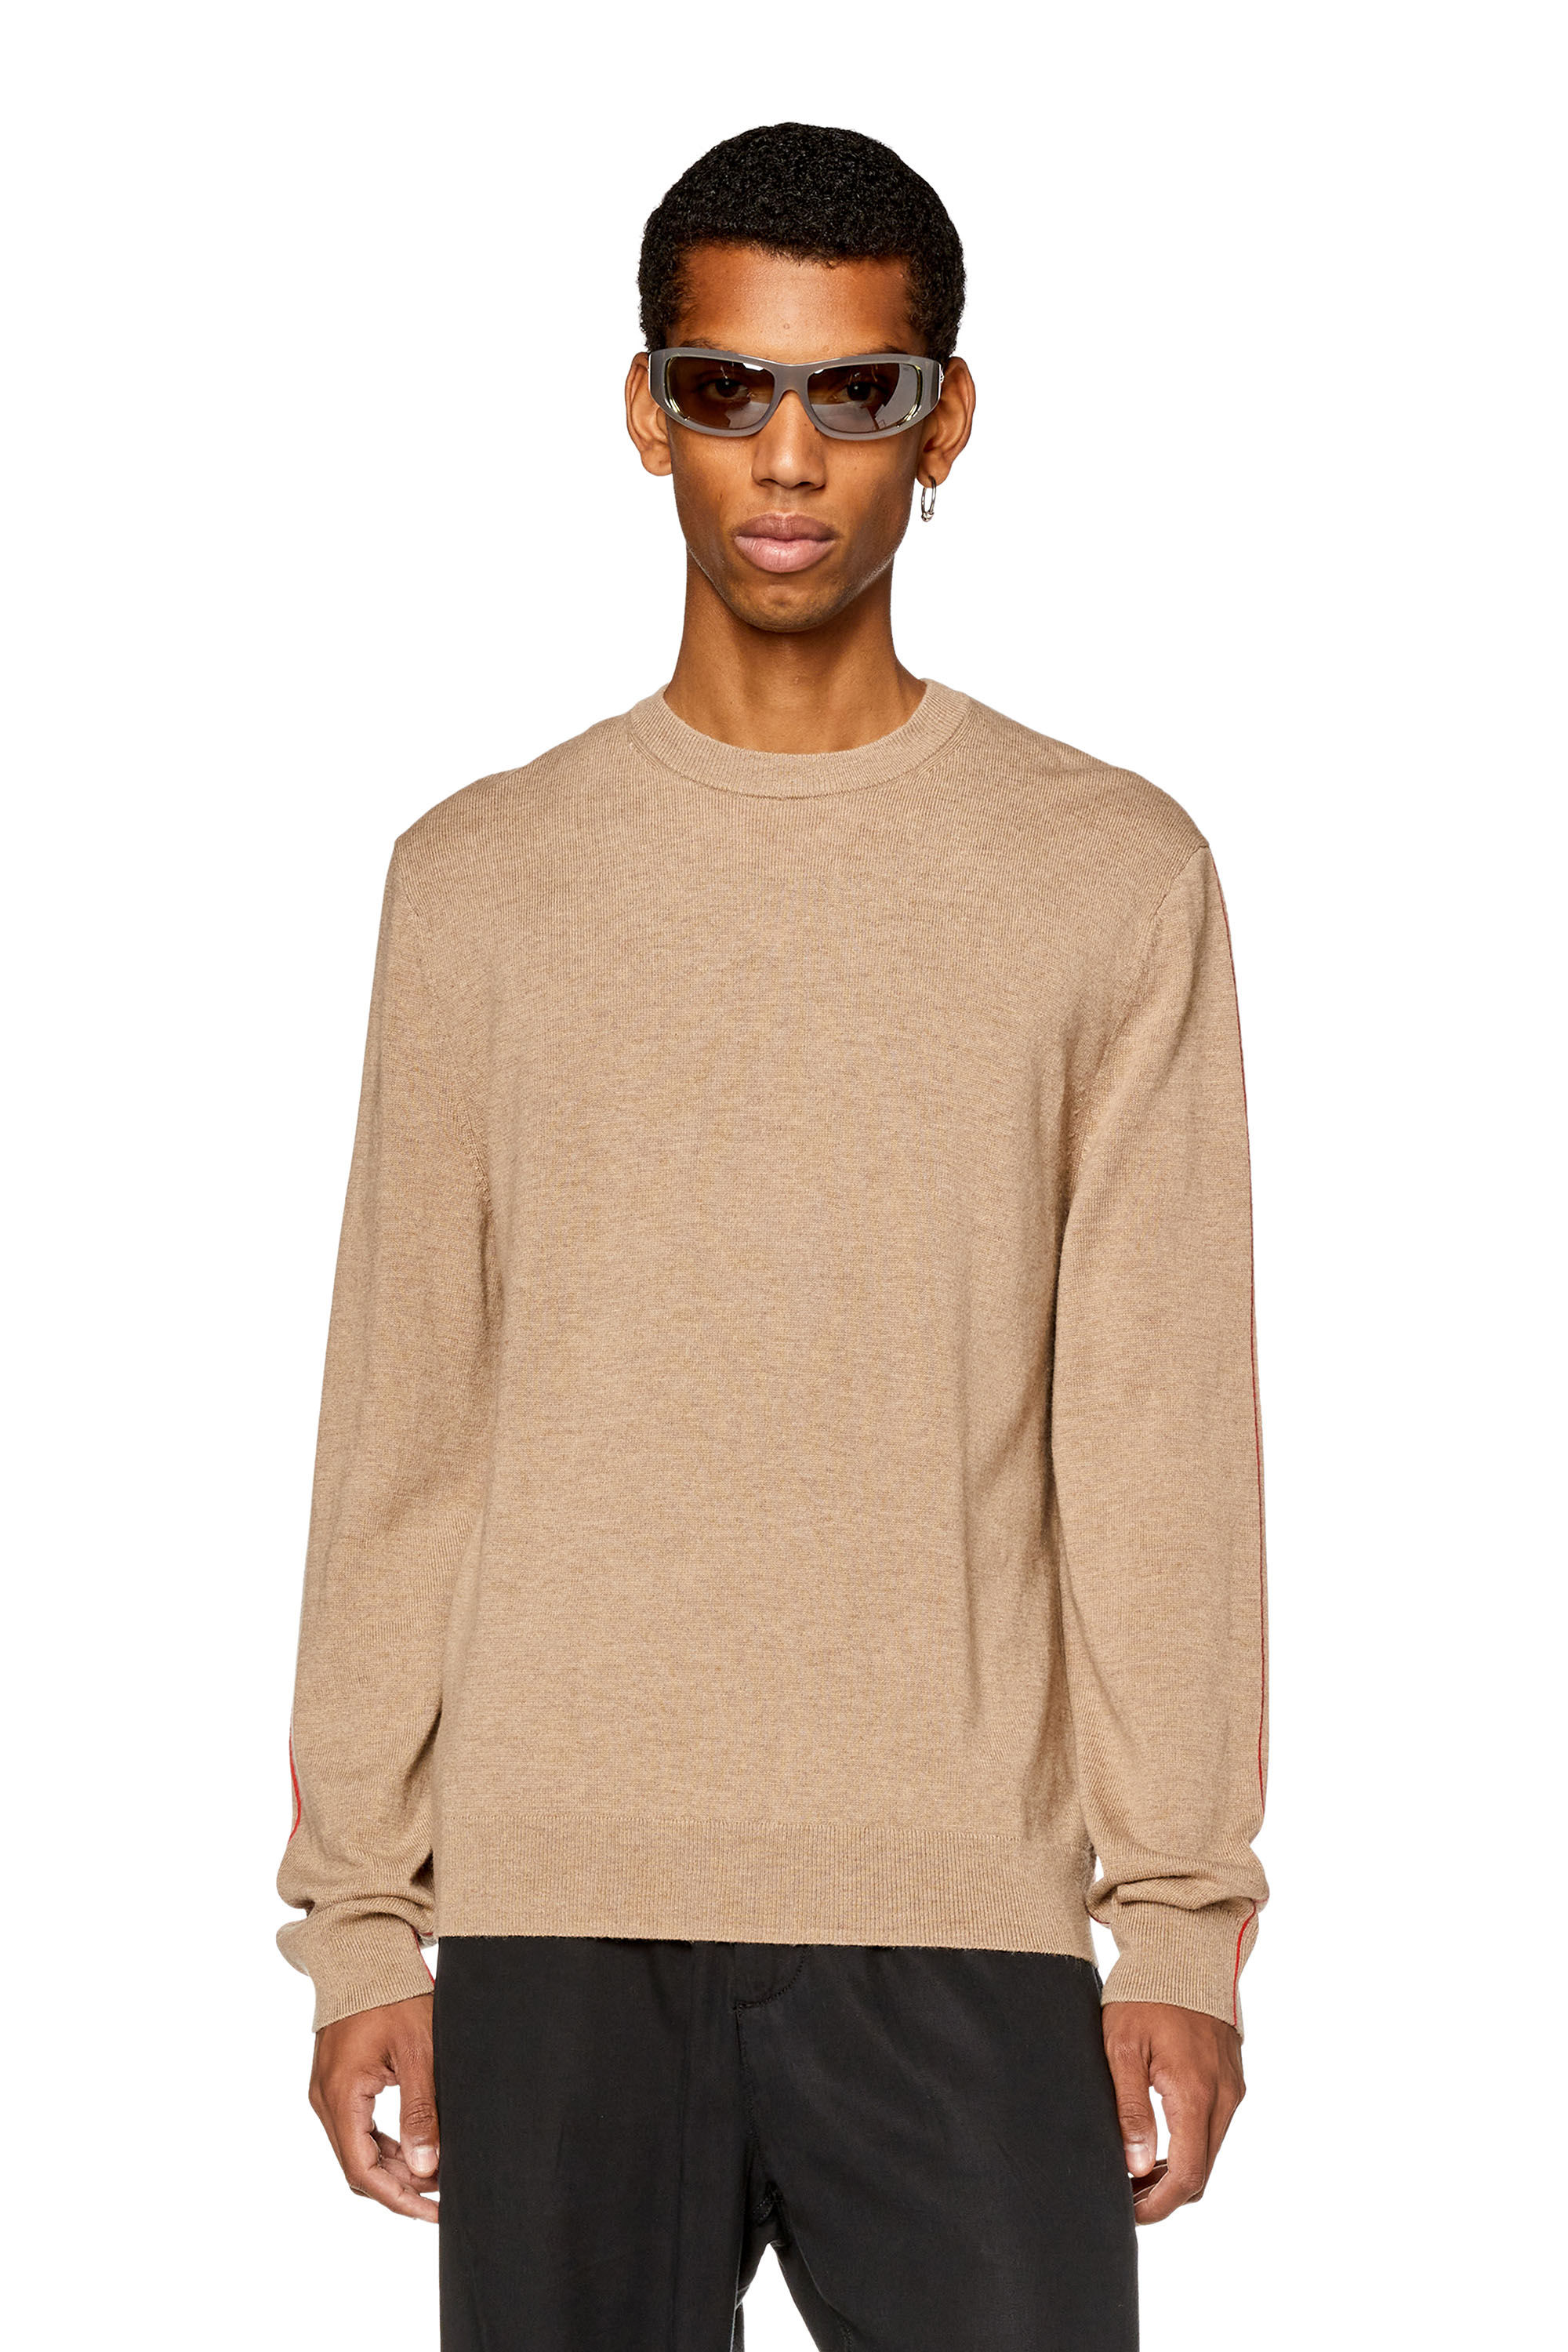 Diesel - Jumper with contrast piping - Knitwear - Man - Brown